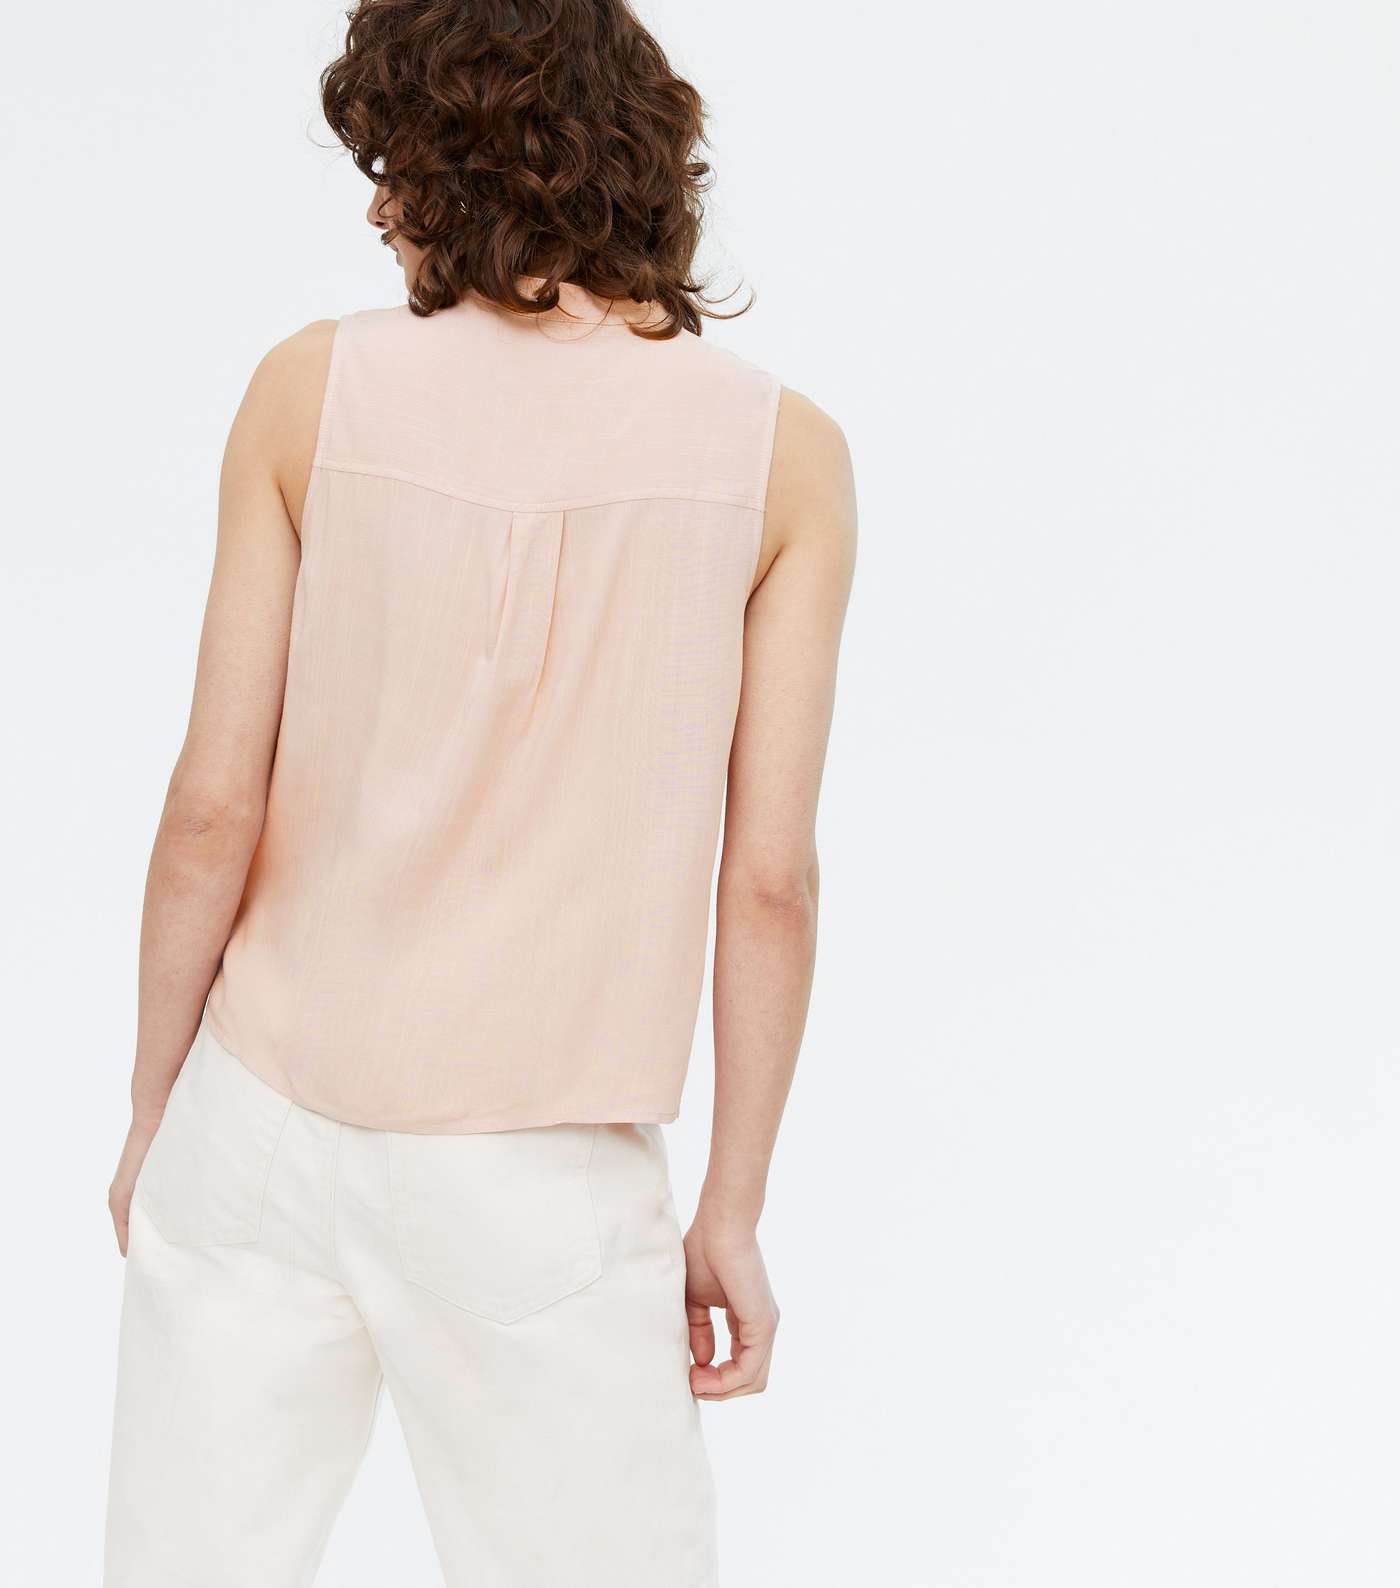 Pale Pink Tie Front Double Pocket Sleeveless Shirt Image 4